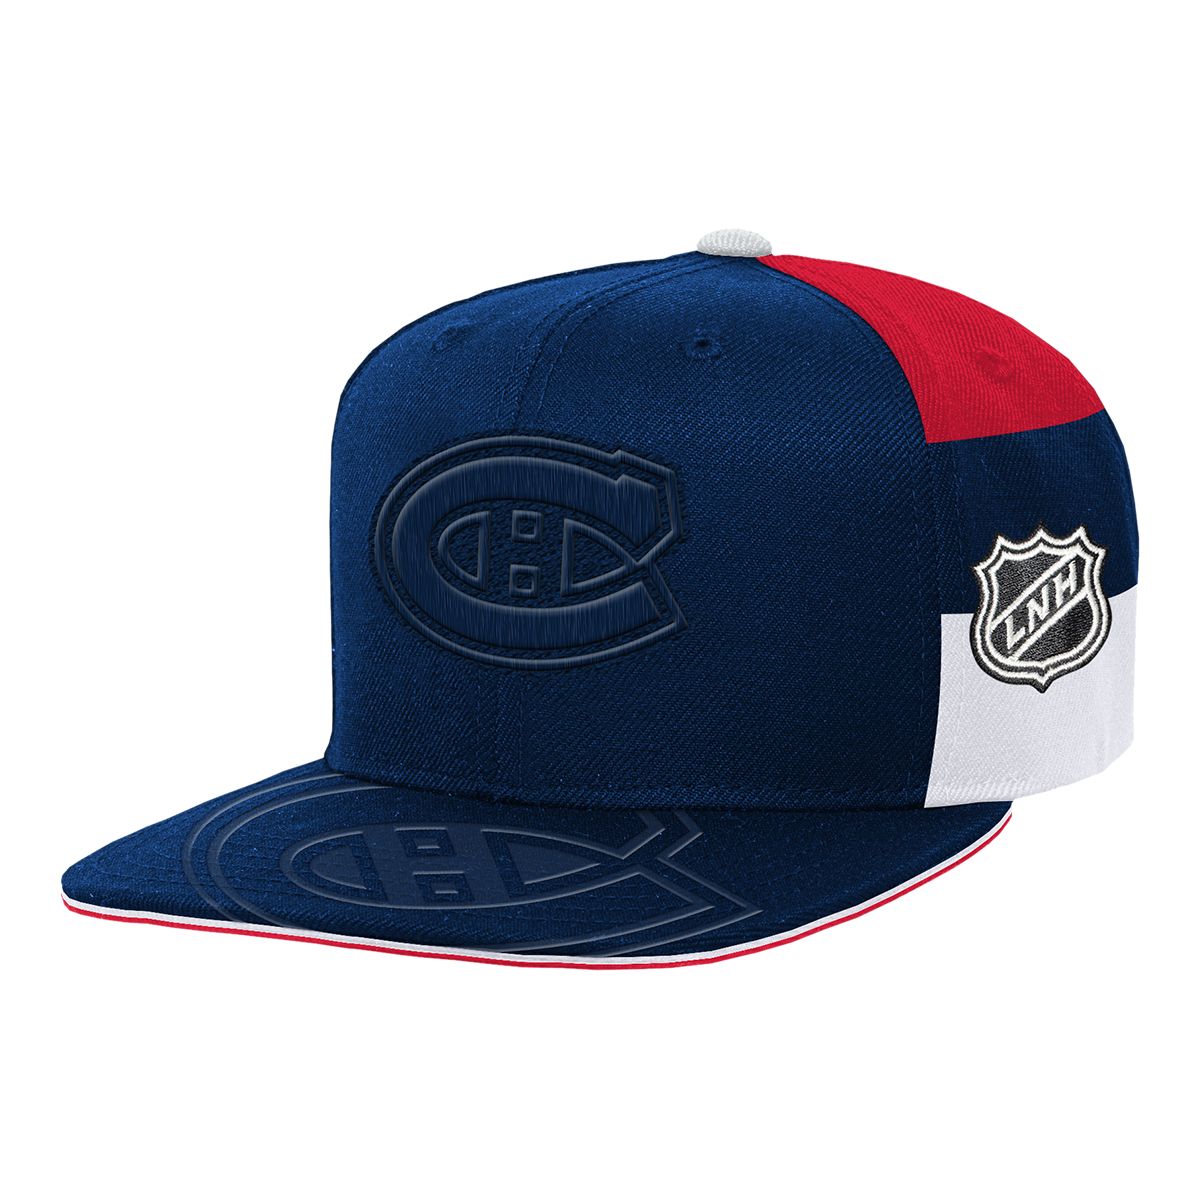 Outerstuff Reverse Retro Pom Knit Hat - Montreal Canadiens - Youth